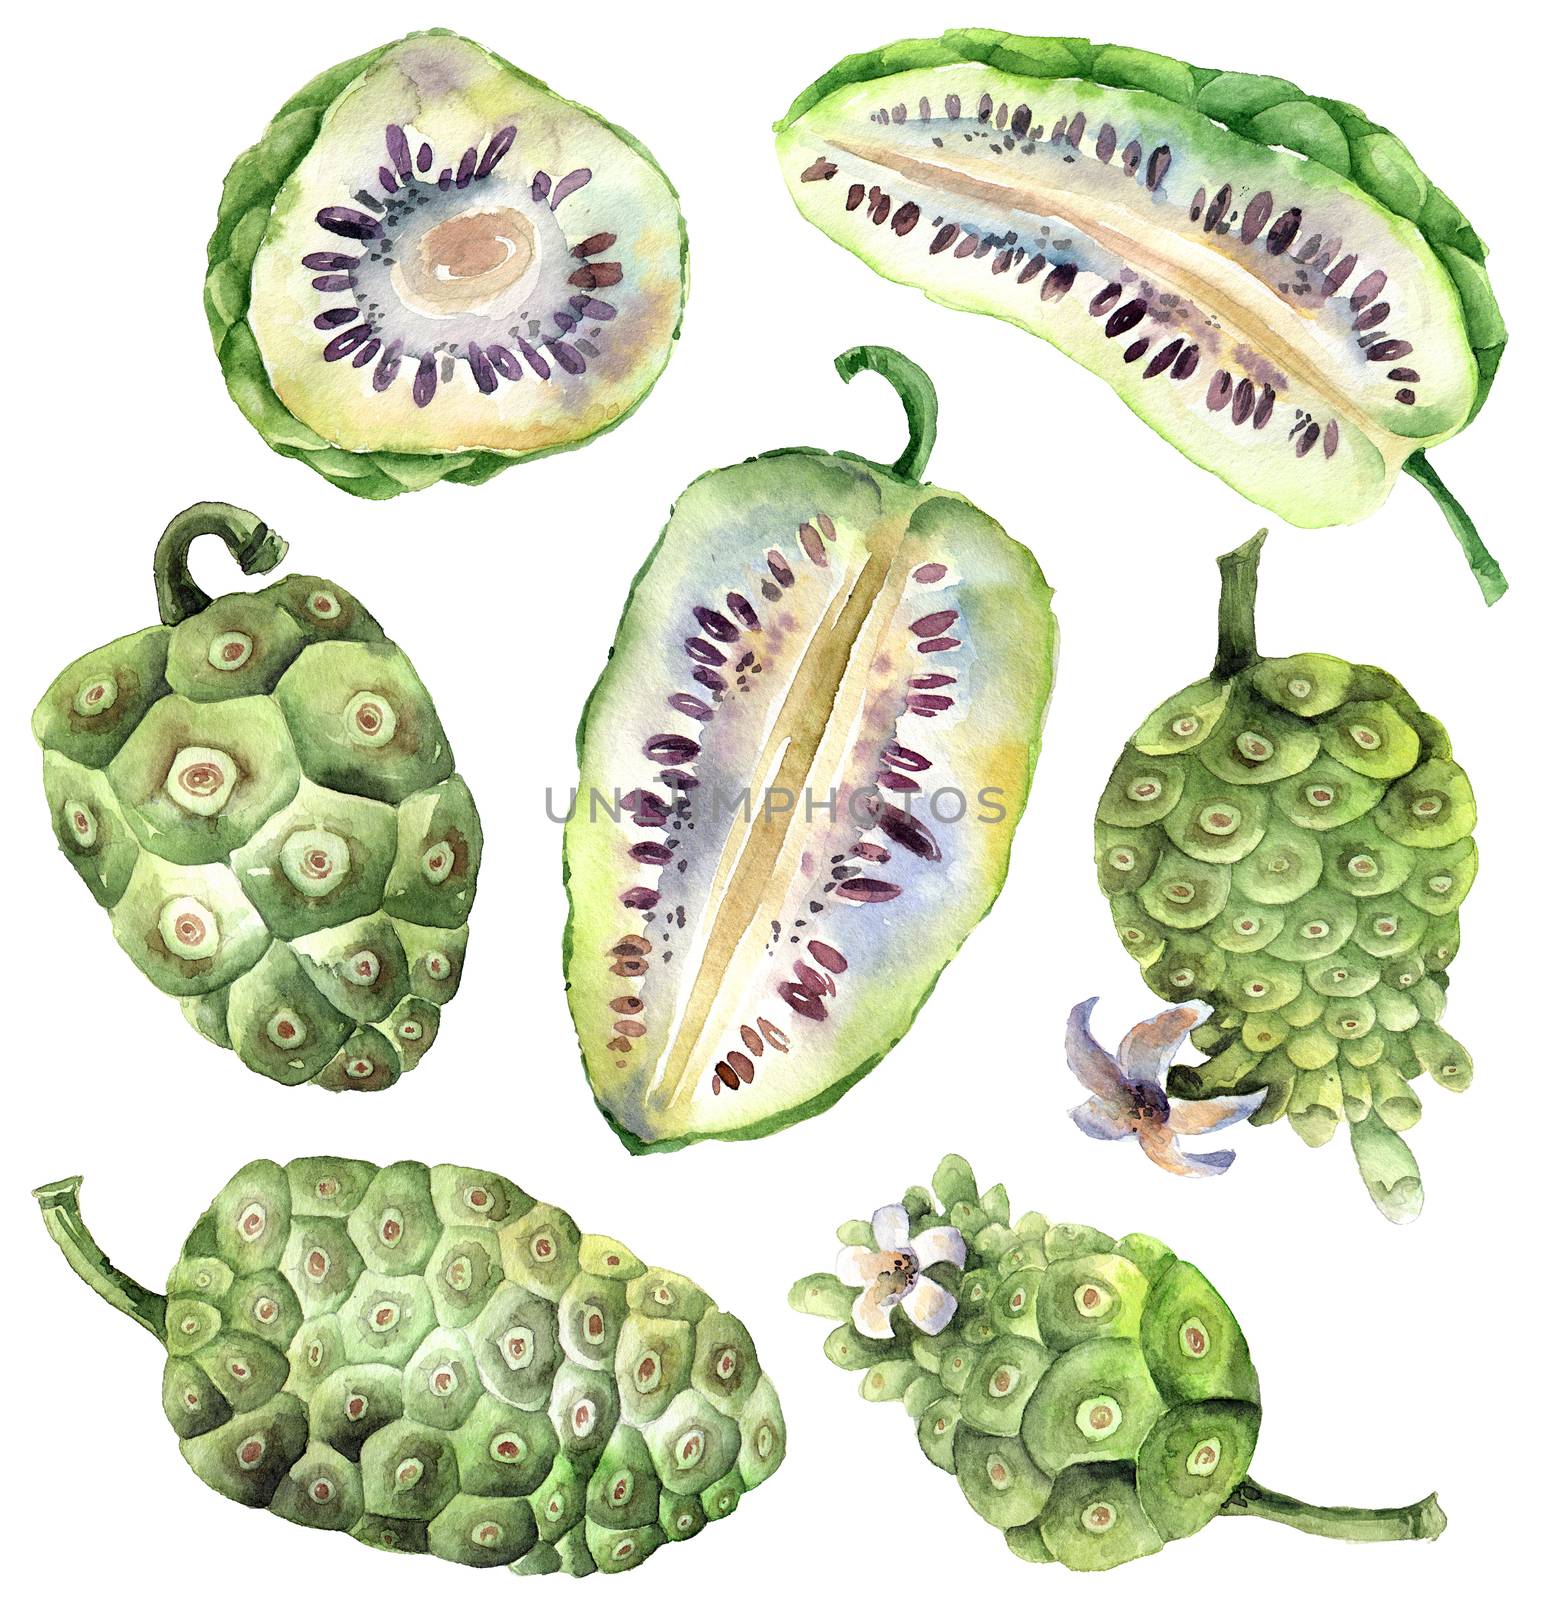 Watercolor painted illustration of noni fruits - complete and cropped fruits. Set of illustrations on white background.